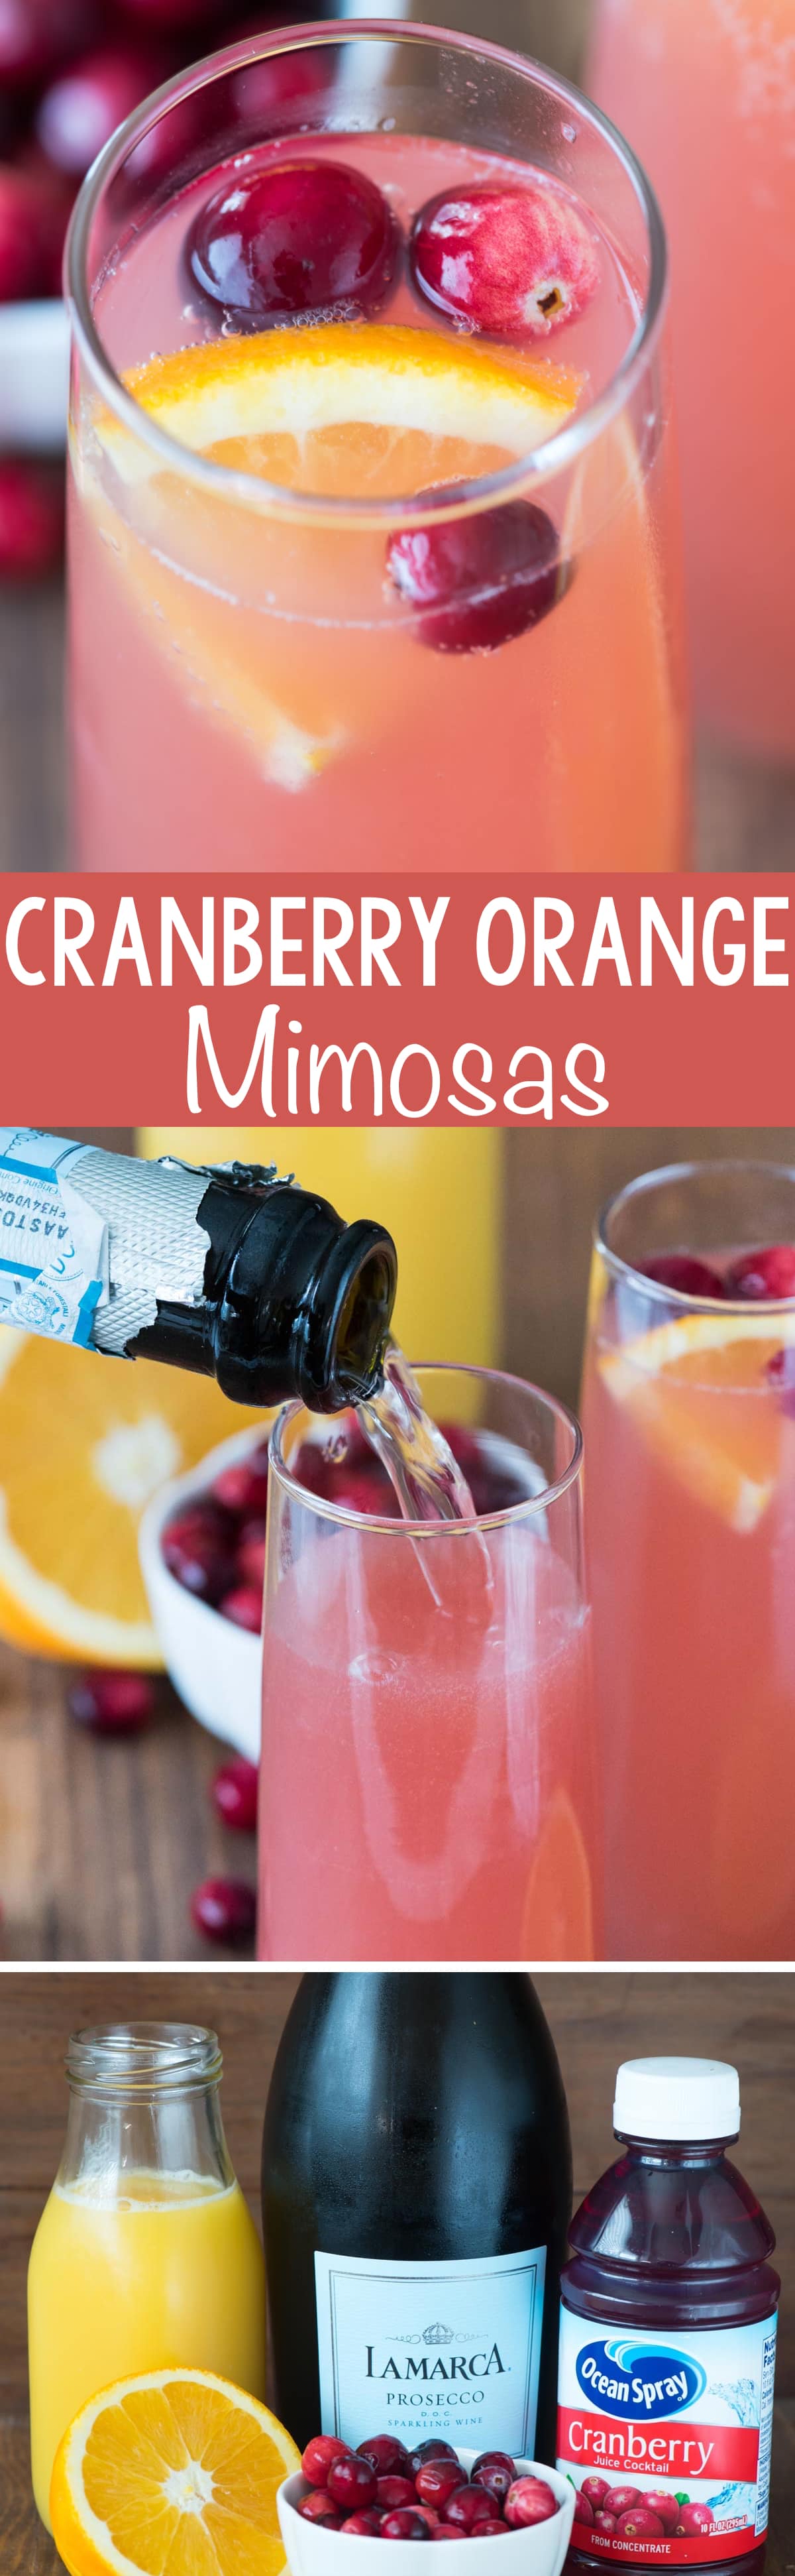 Cranberry Orange Mimosa Bellini Crazy For Crust,How To Make A Tequila Sunrise Cocktail